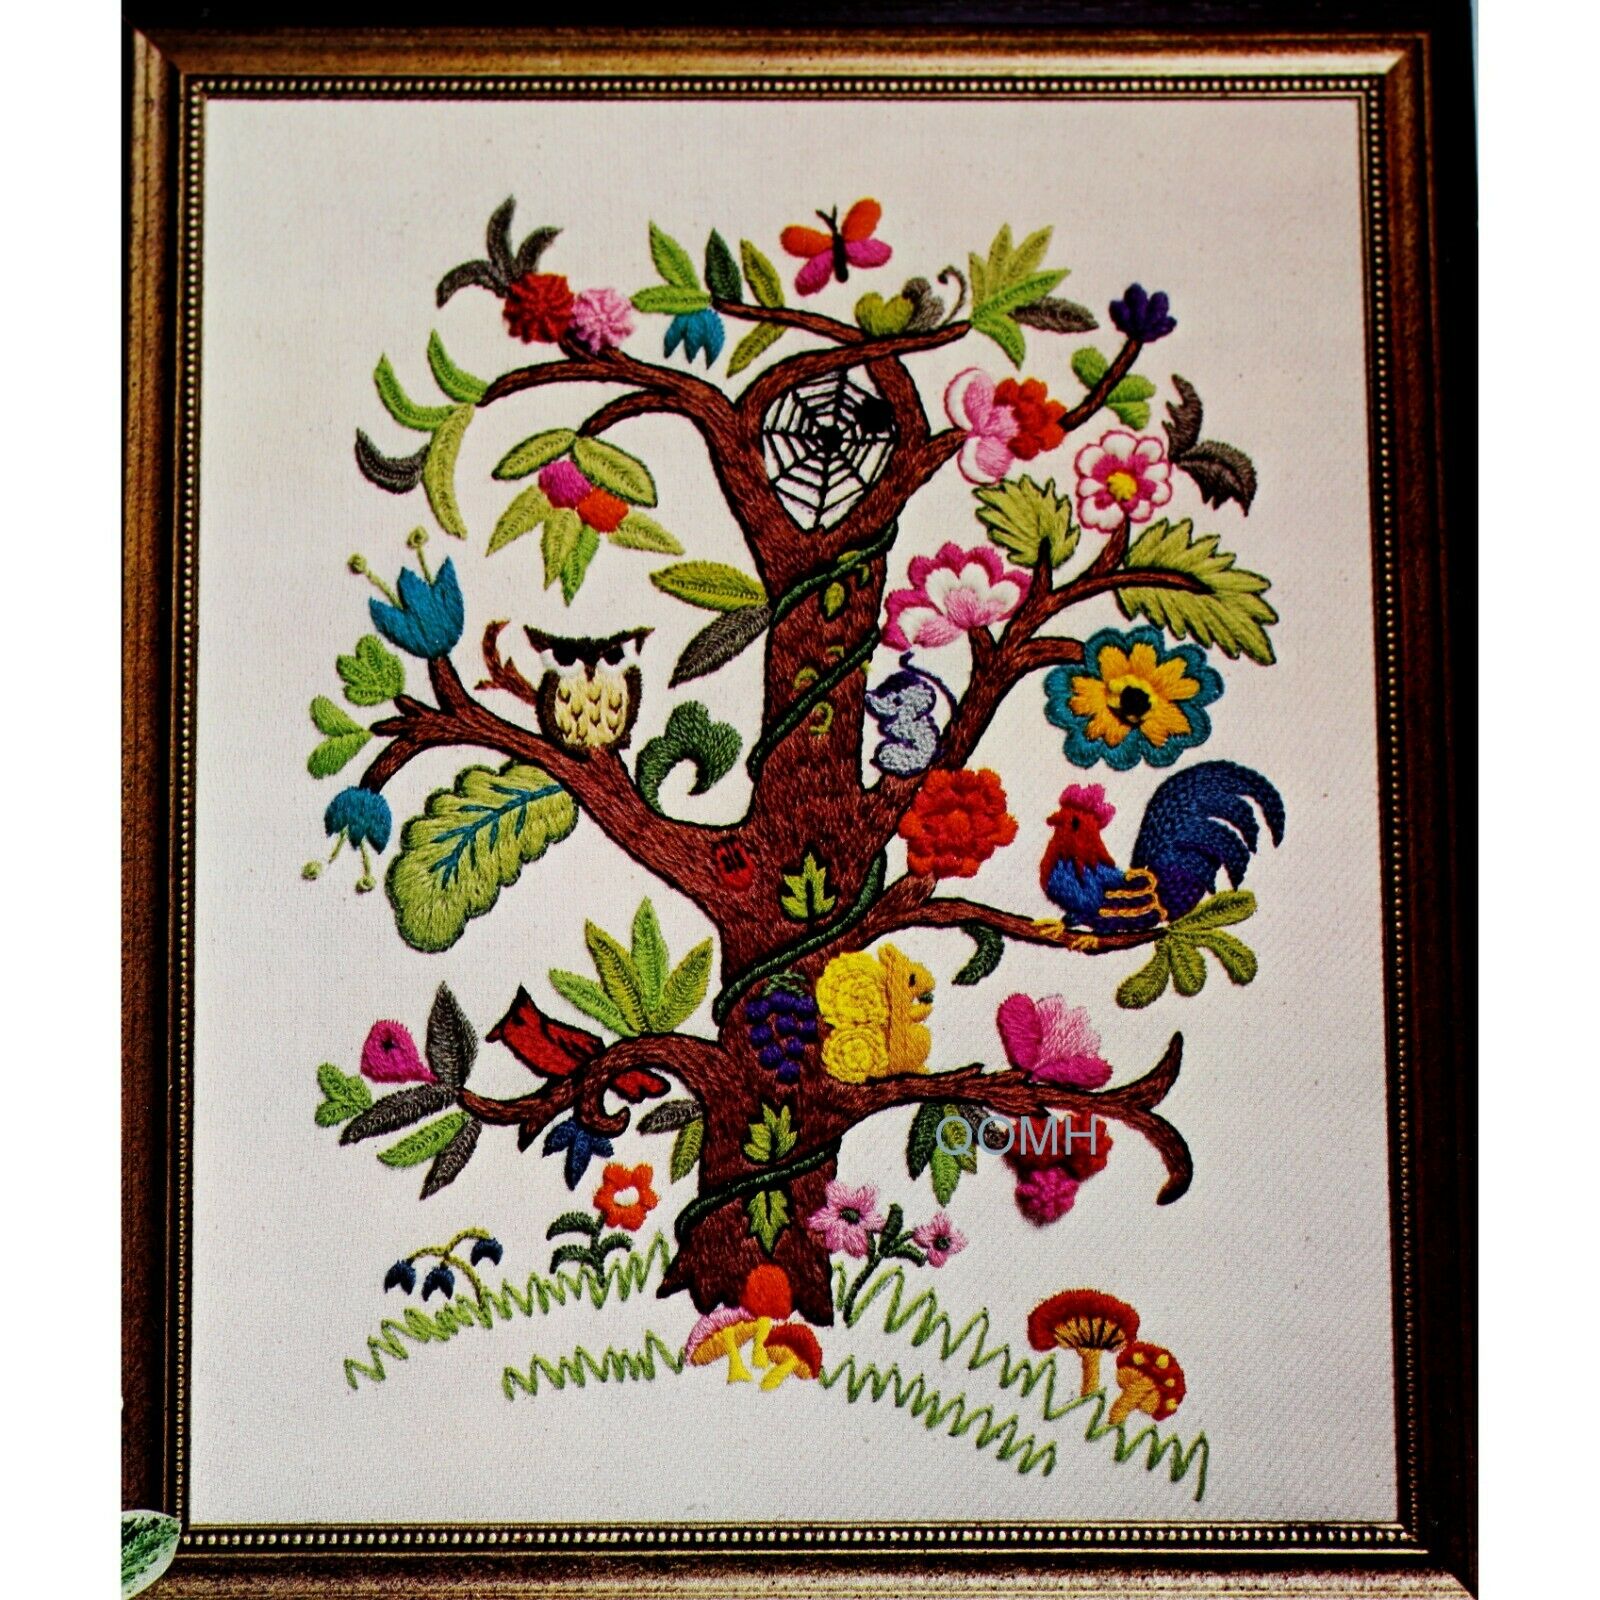 Ecology Tree Erica Wilson Vintage Crewel Embroidery Kit Owl Rooster Cardinal